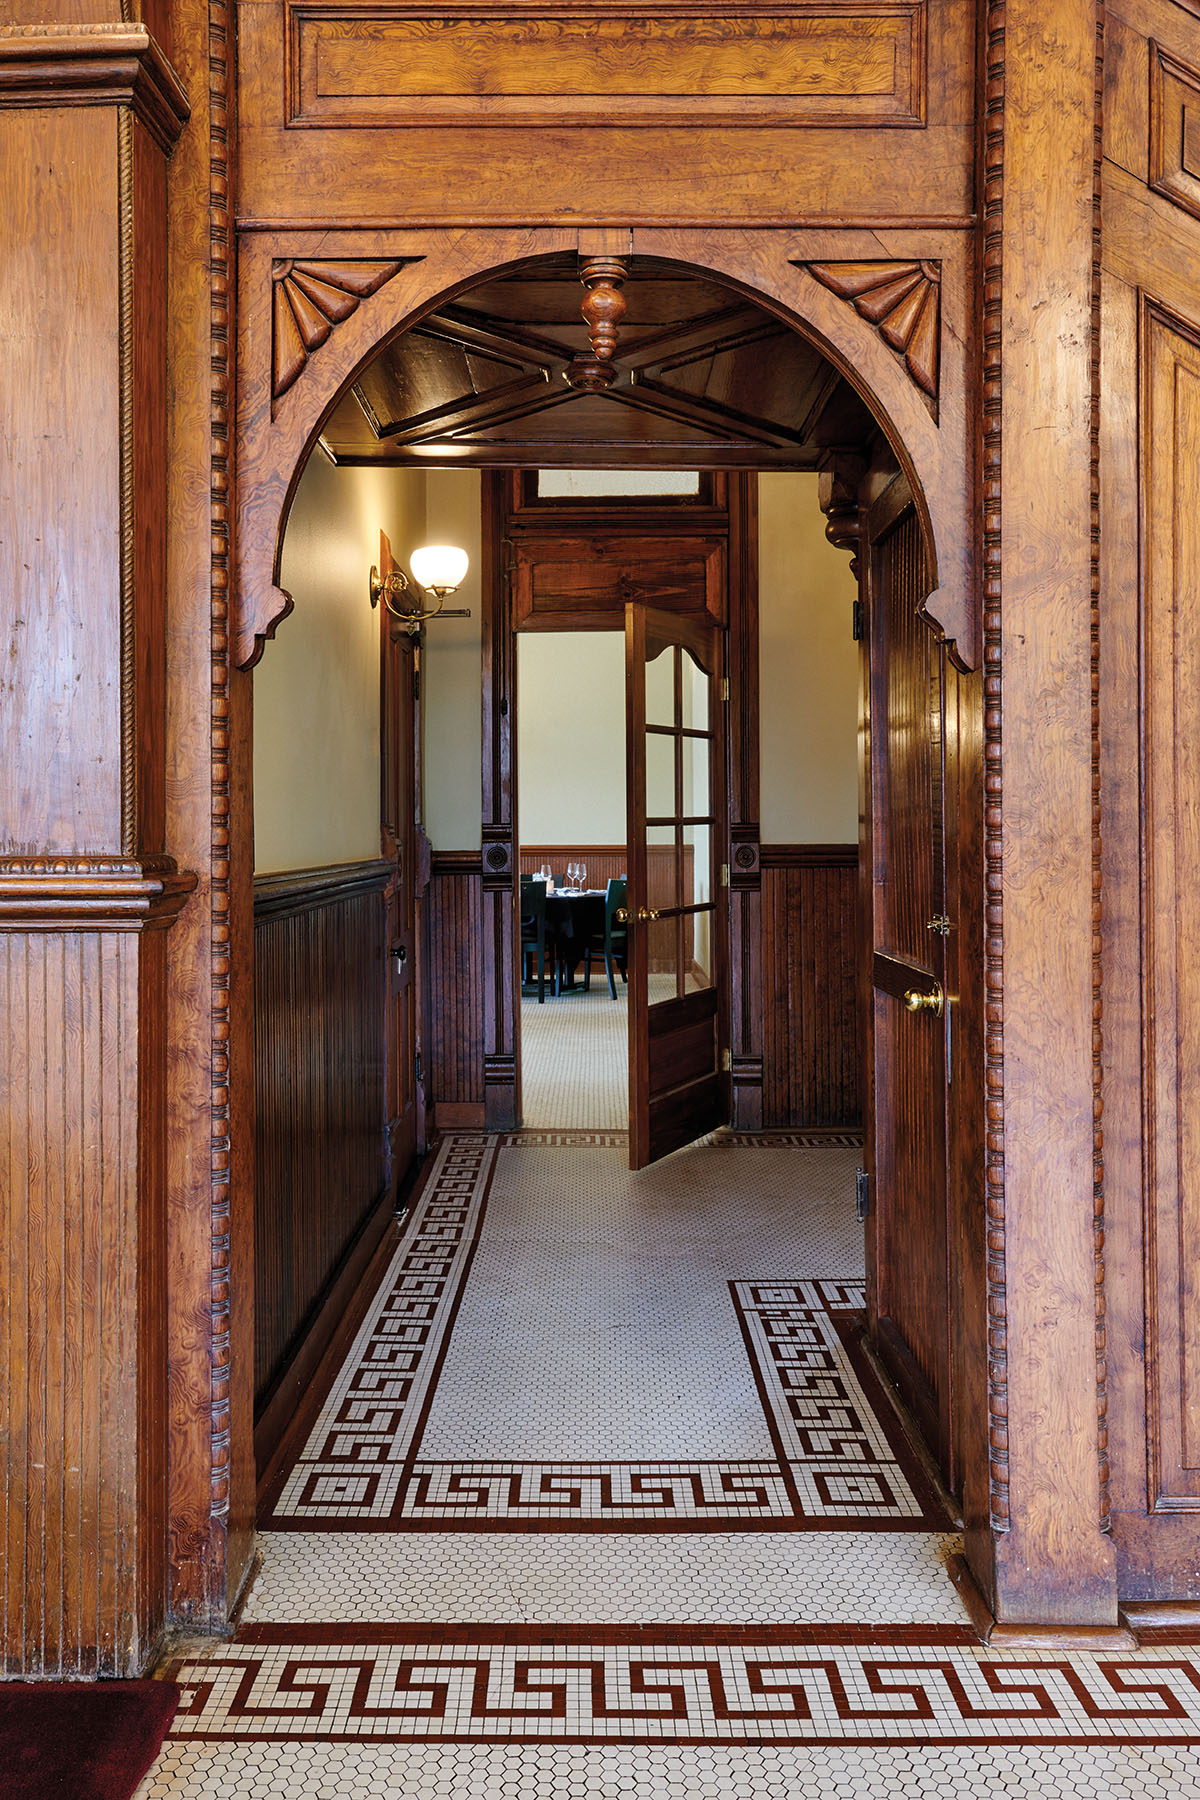 An ornate wooden entryway with wooden doors and precise white and brown tile